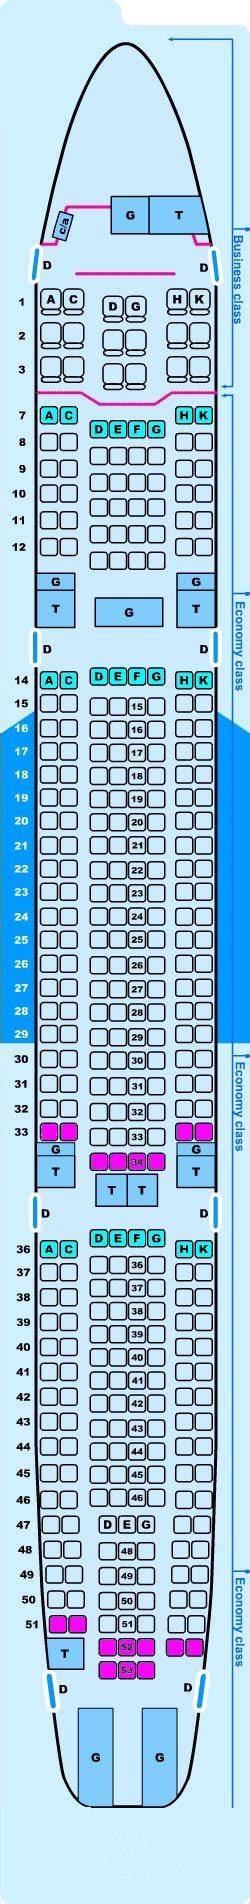 Airbus a330-300 seat chart. Overview. The SriLankan Airlines Airbus A330-300 is primarily operated on medium and long-haul routes. This A330-300 features a two class configuration with 28 flat bed Business Class seats and 269 standard Economy Class seats. 